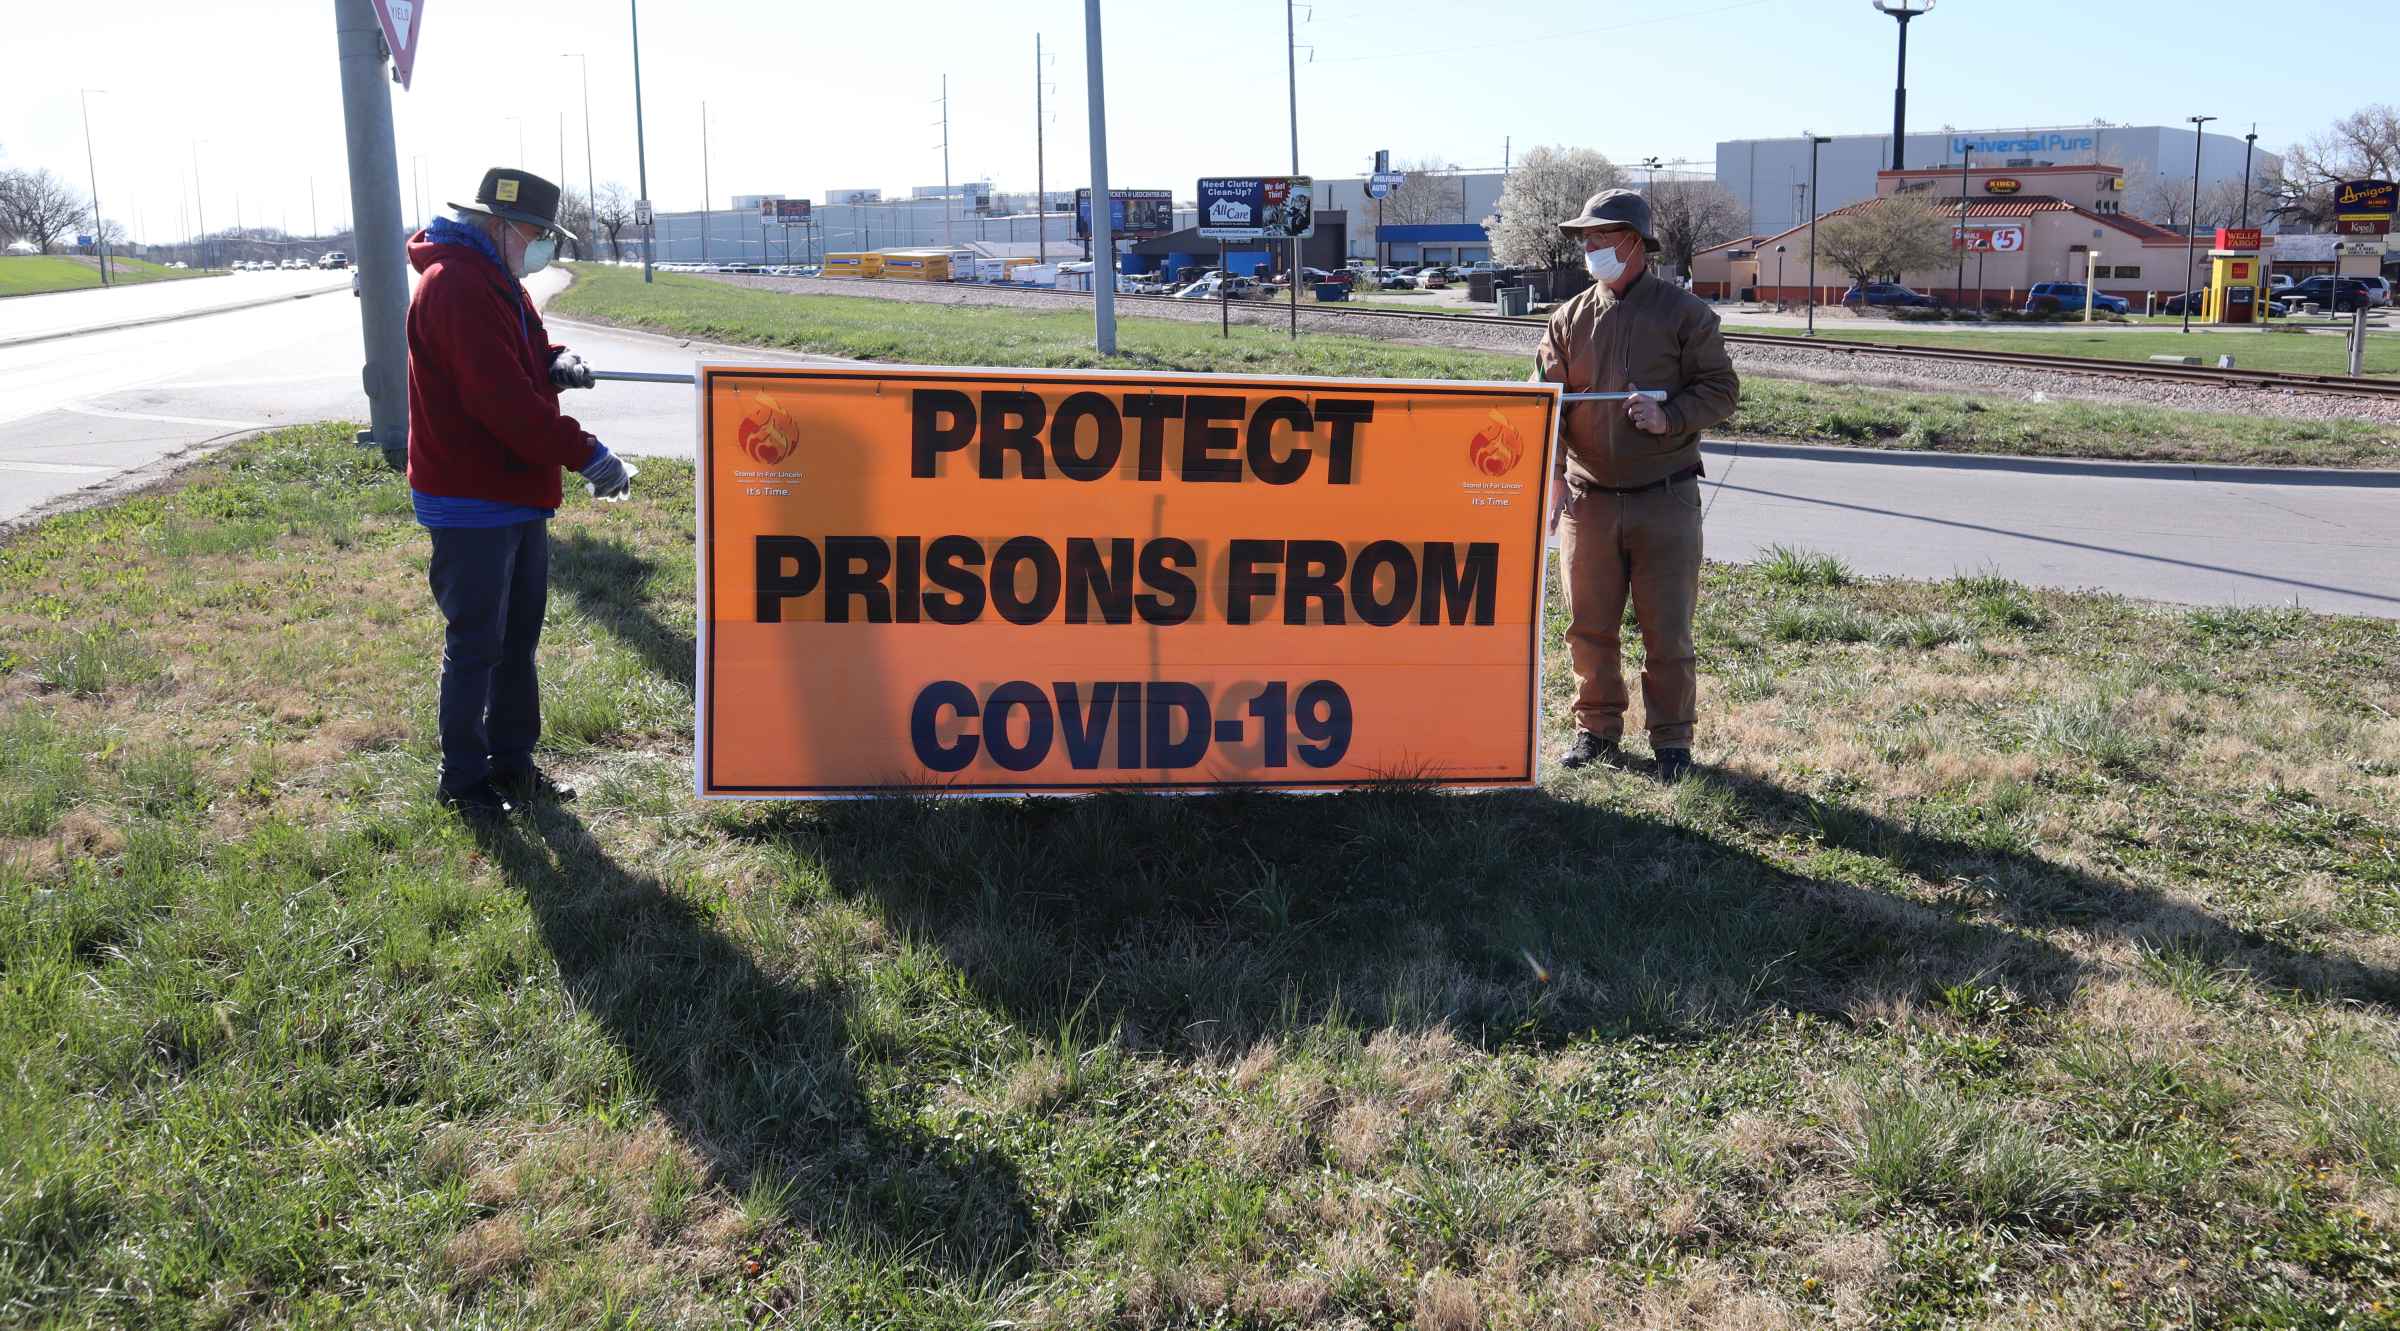 A sign reads "Protect Prisons from COVID-19."